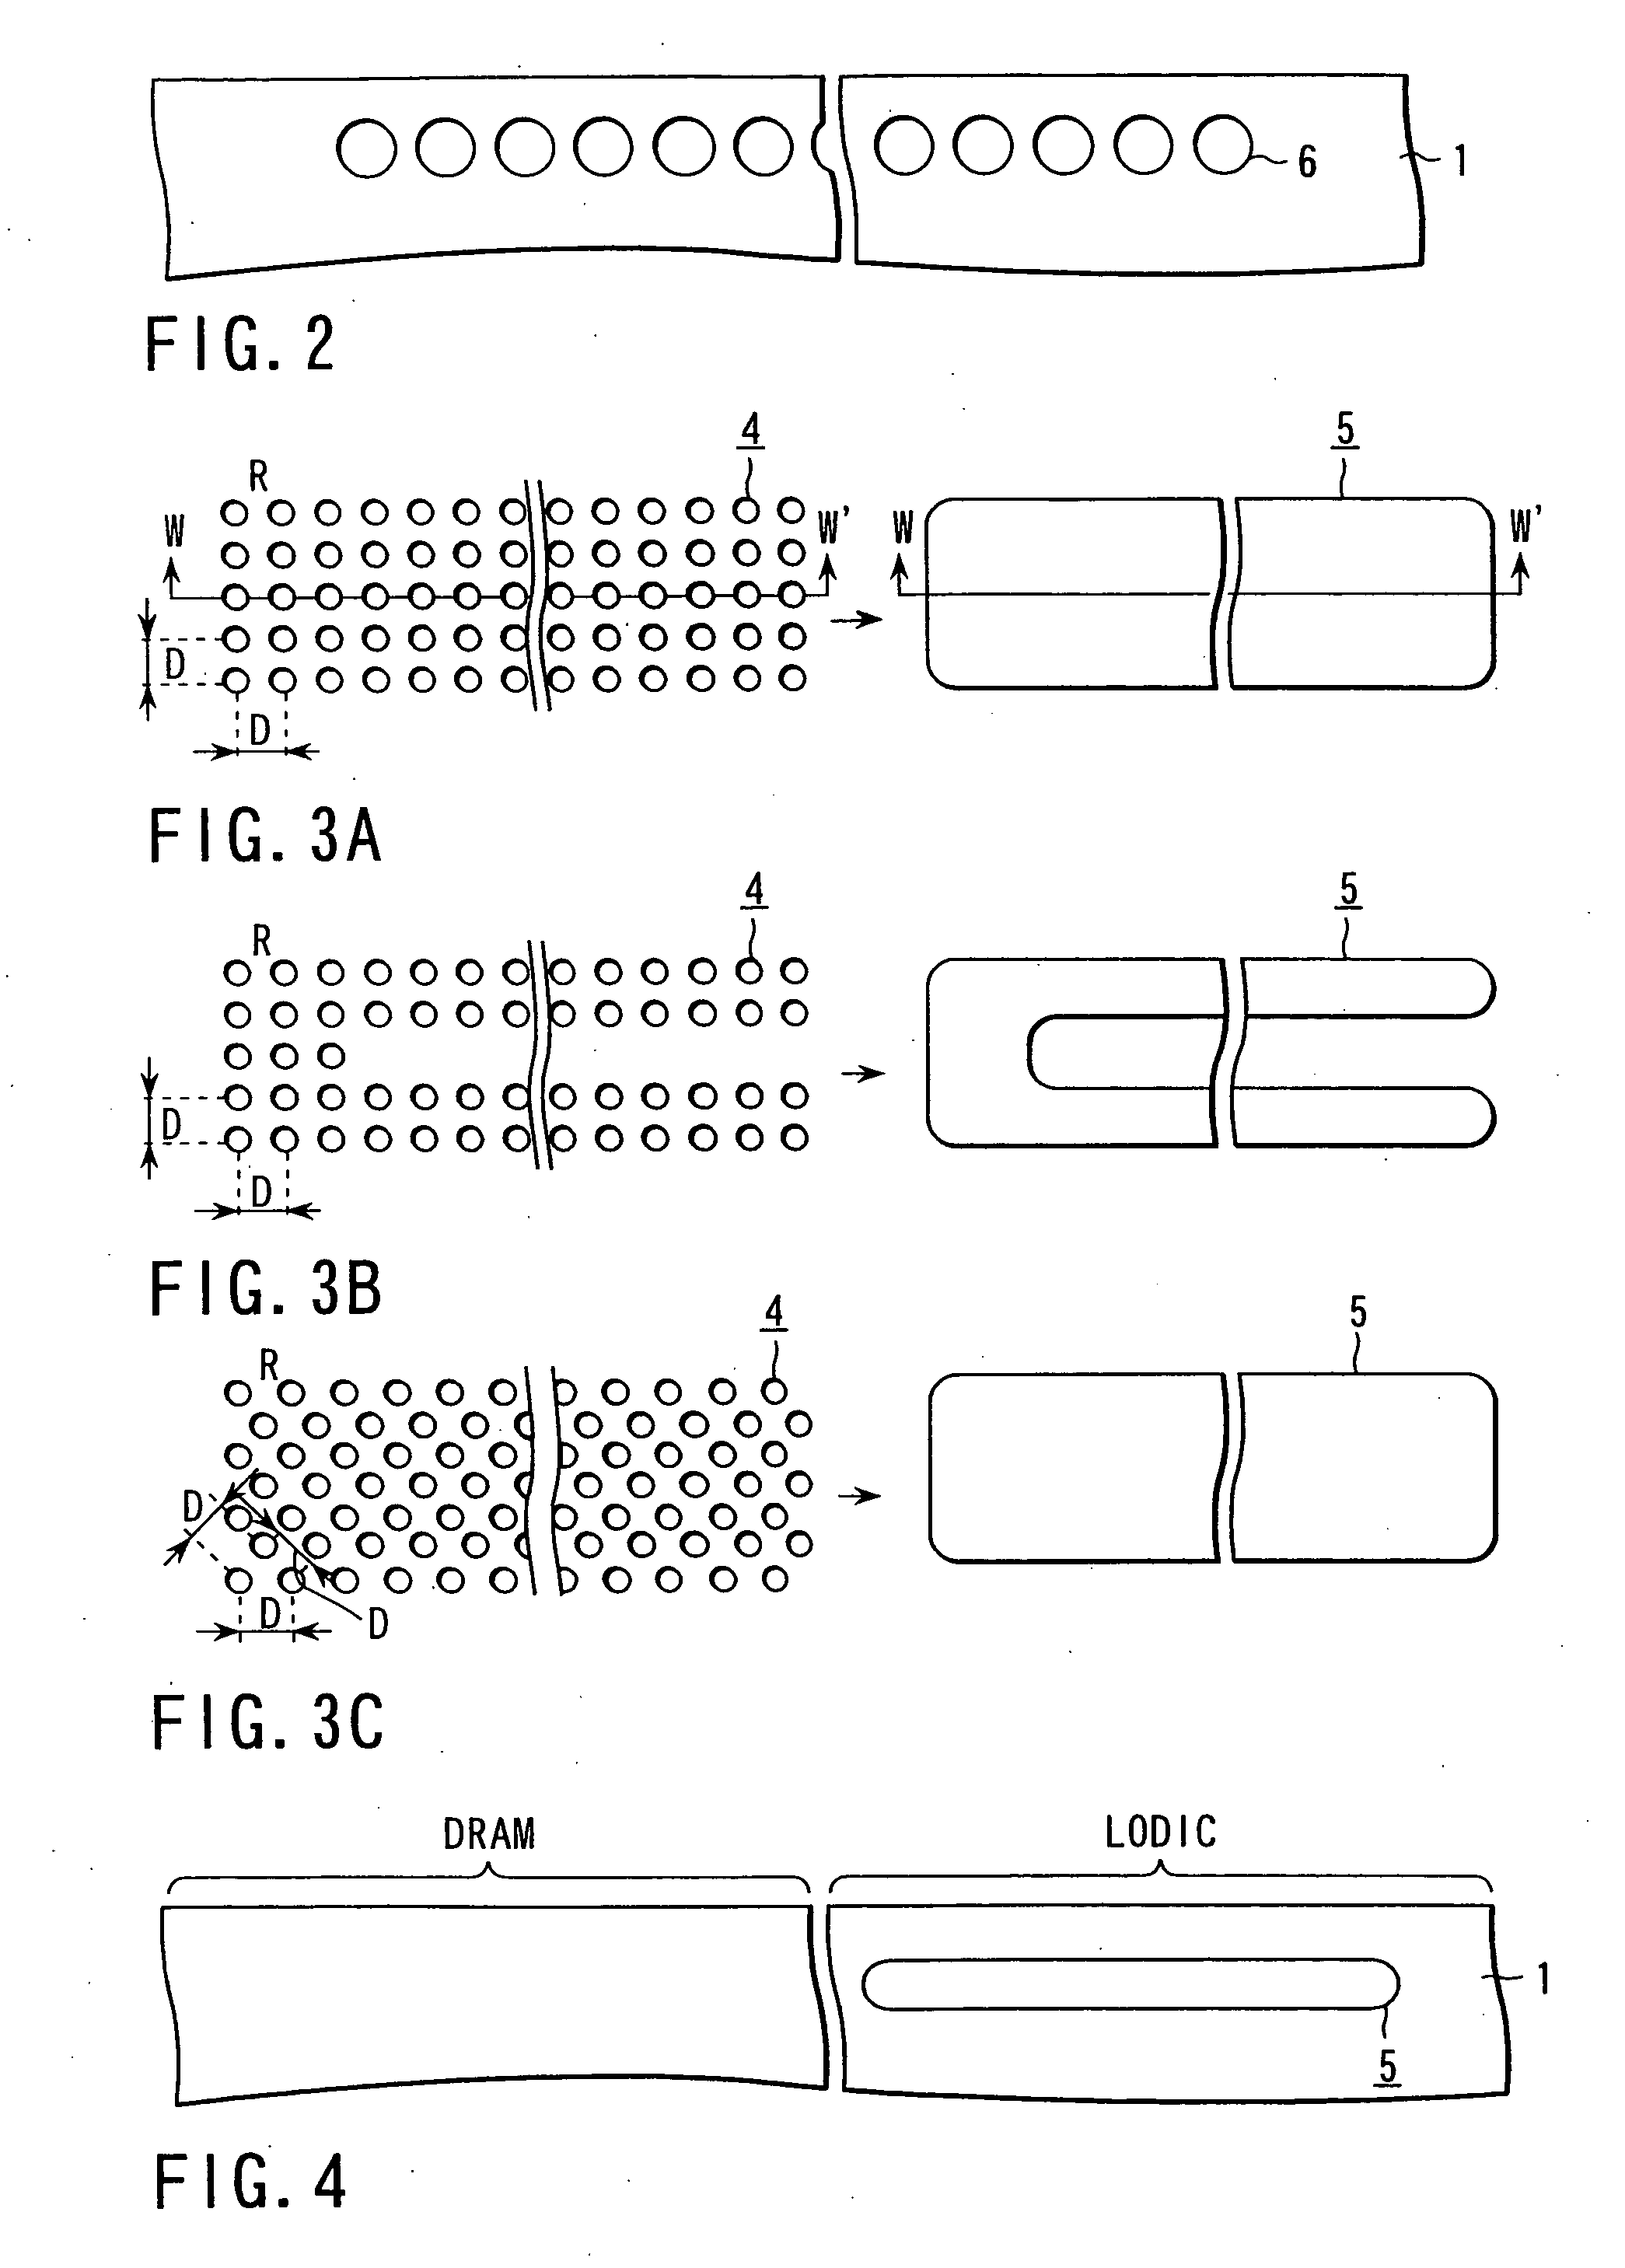 Semiconductor substrate and its fabrication method